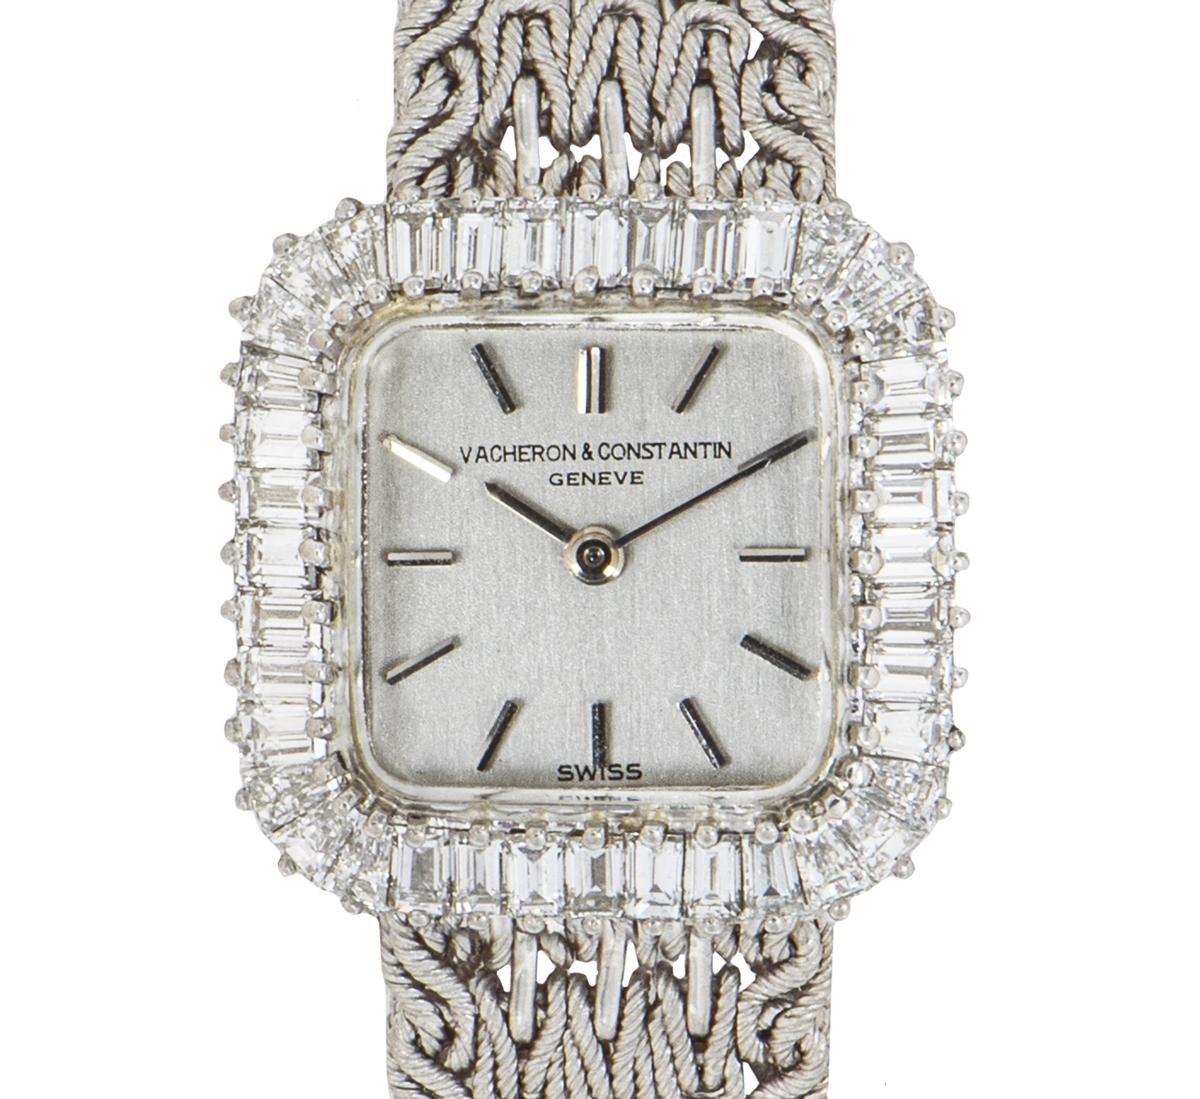 A stunning 20mm white gold cocktail watch by Vacheron Constantin. Featuring a distinctive silver dial with applied hour markers and a fixed white gold bezel set with 40 diamond baguettes weighing 2.02ct. Fitted with a plastic glass, a manual wind